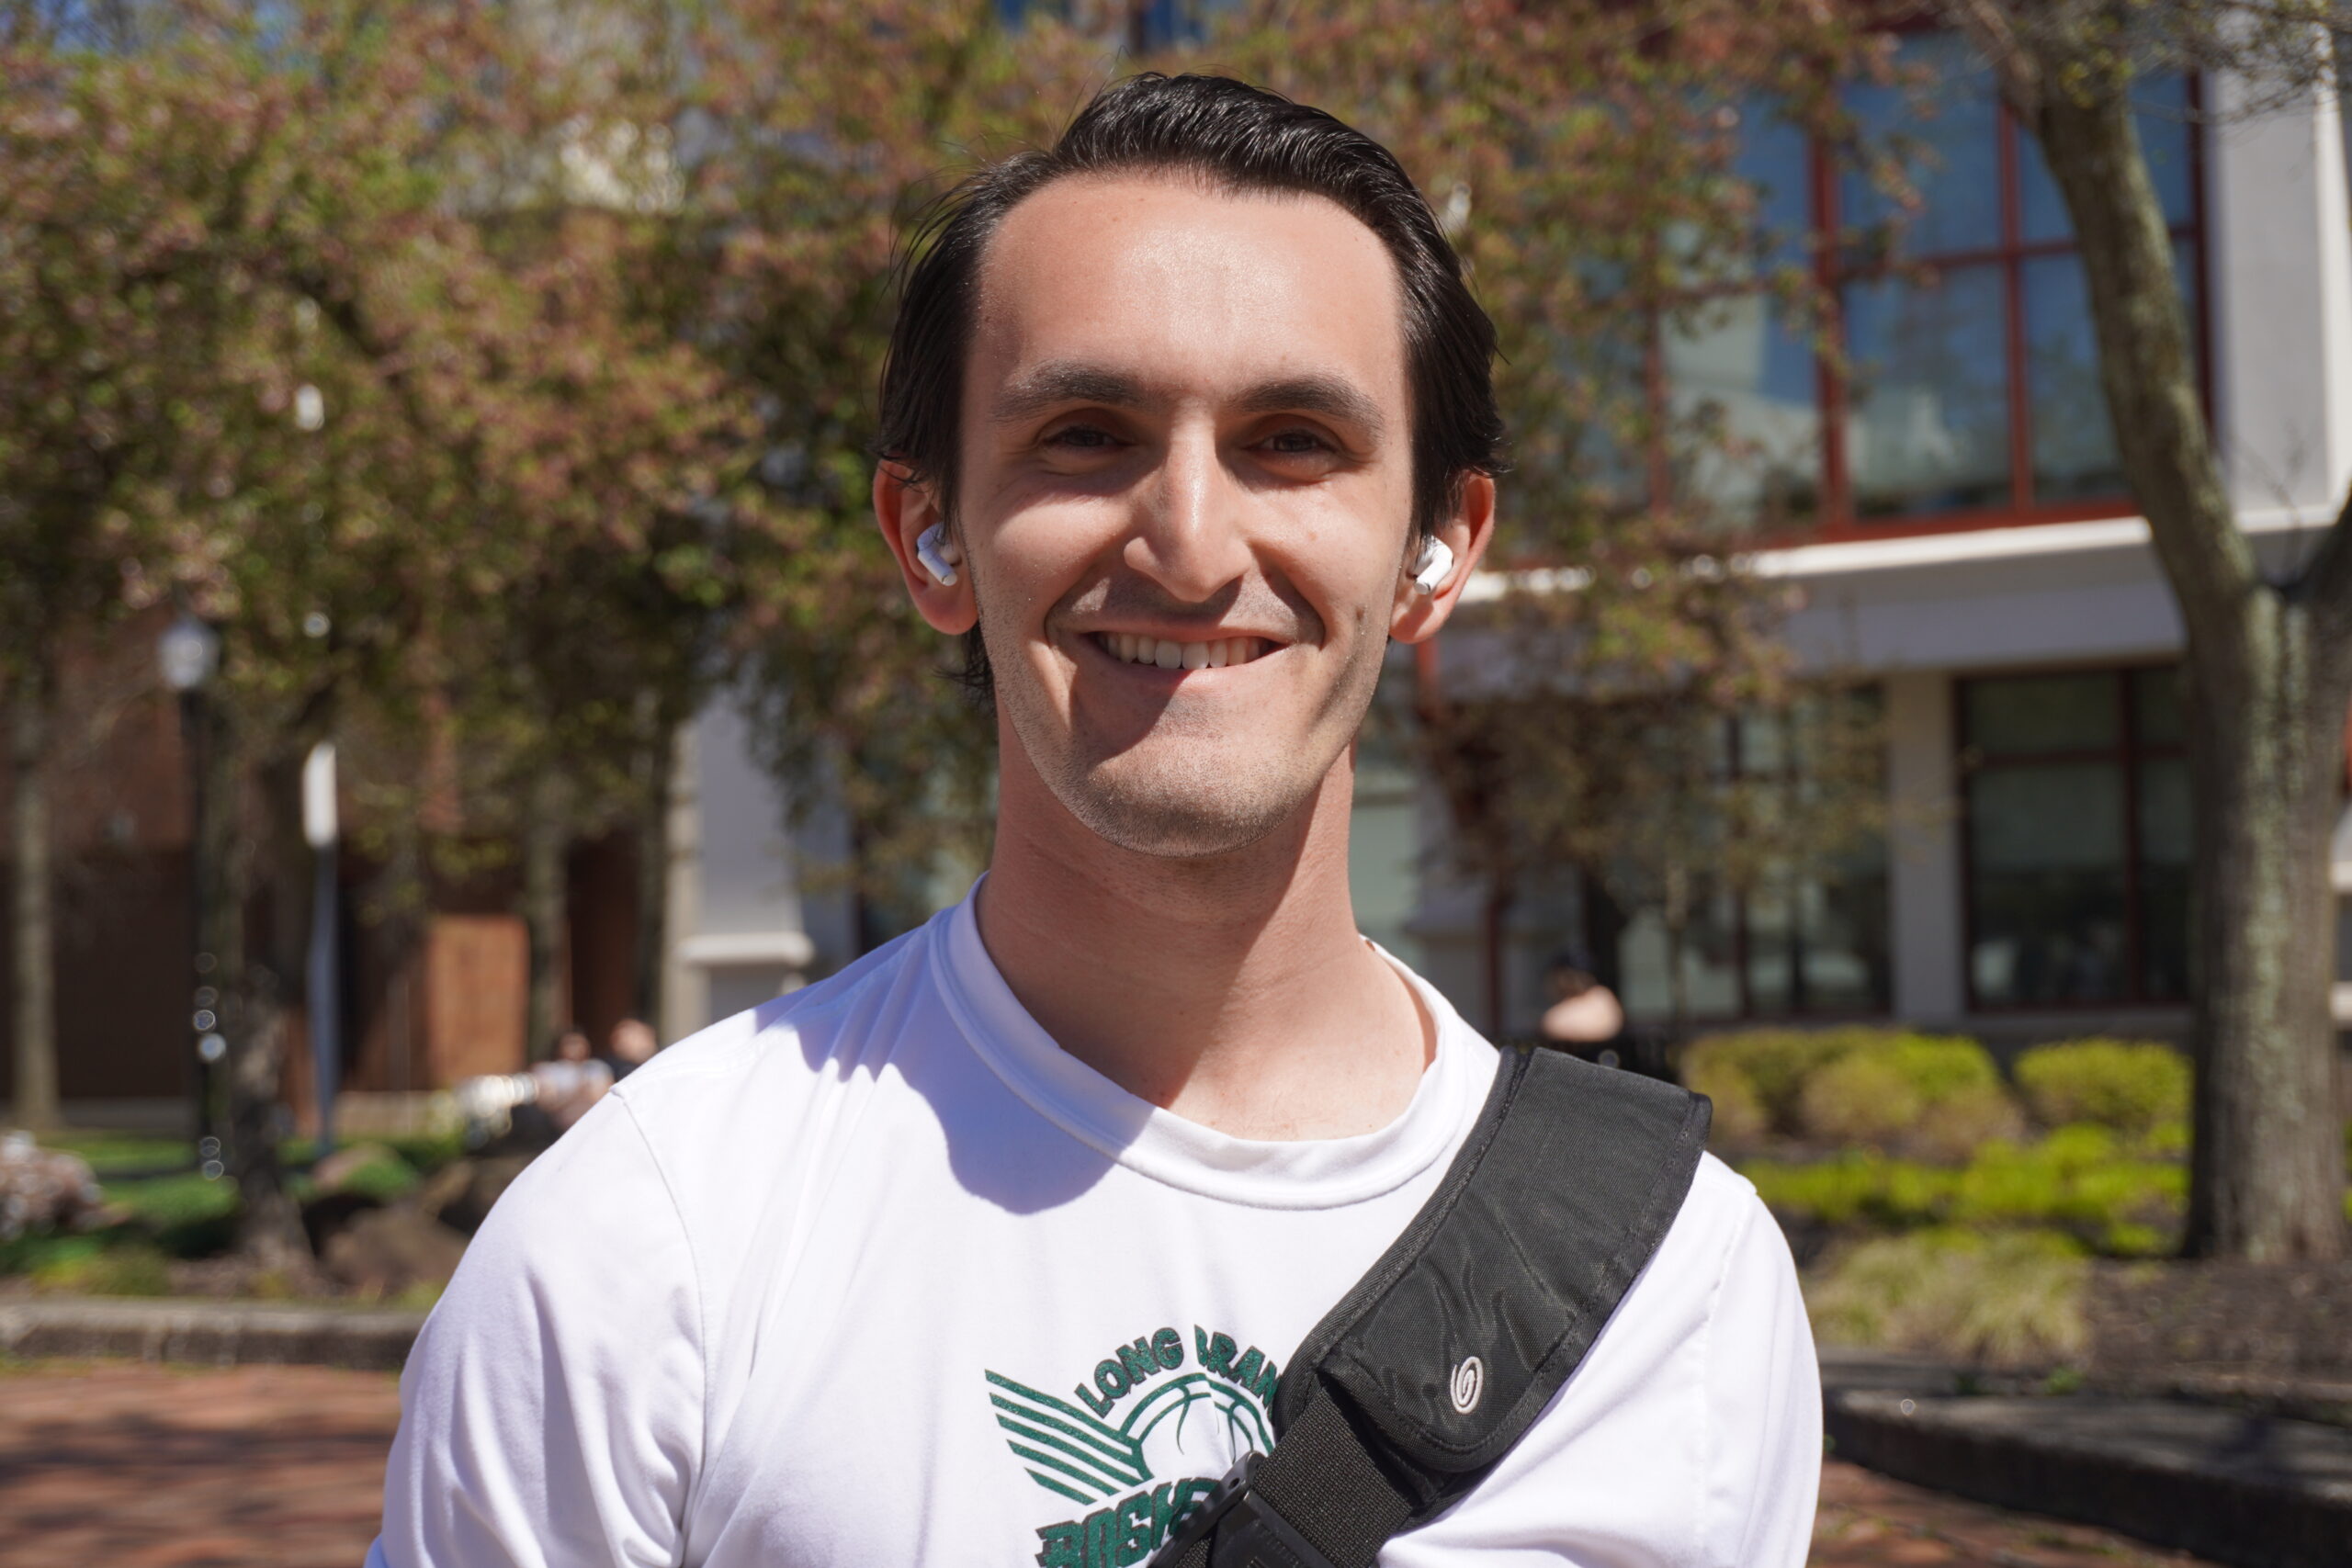 Dominic Sama, a junior political science major, believes everyone should be politically active, regardless of their views. Jordan Reed | The Montclarion